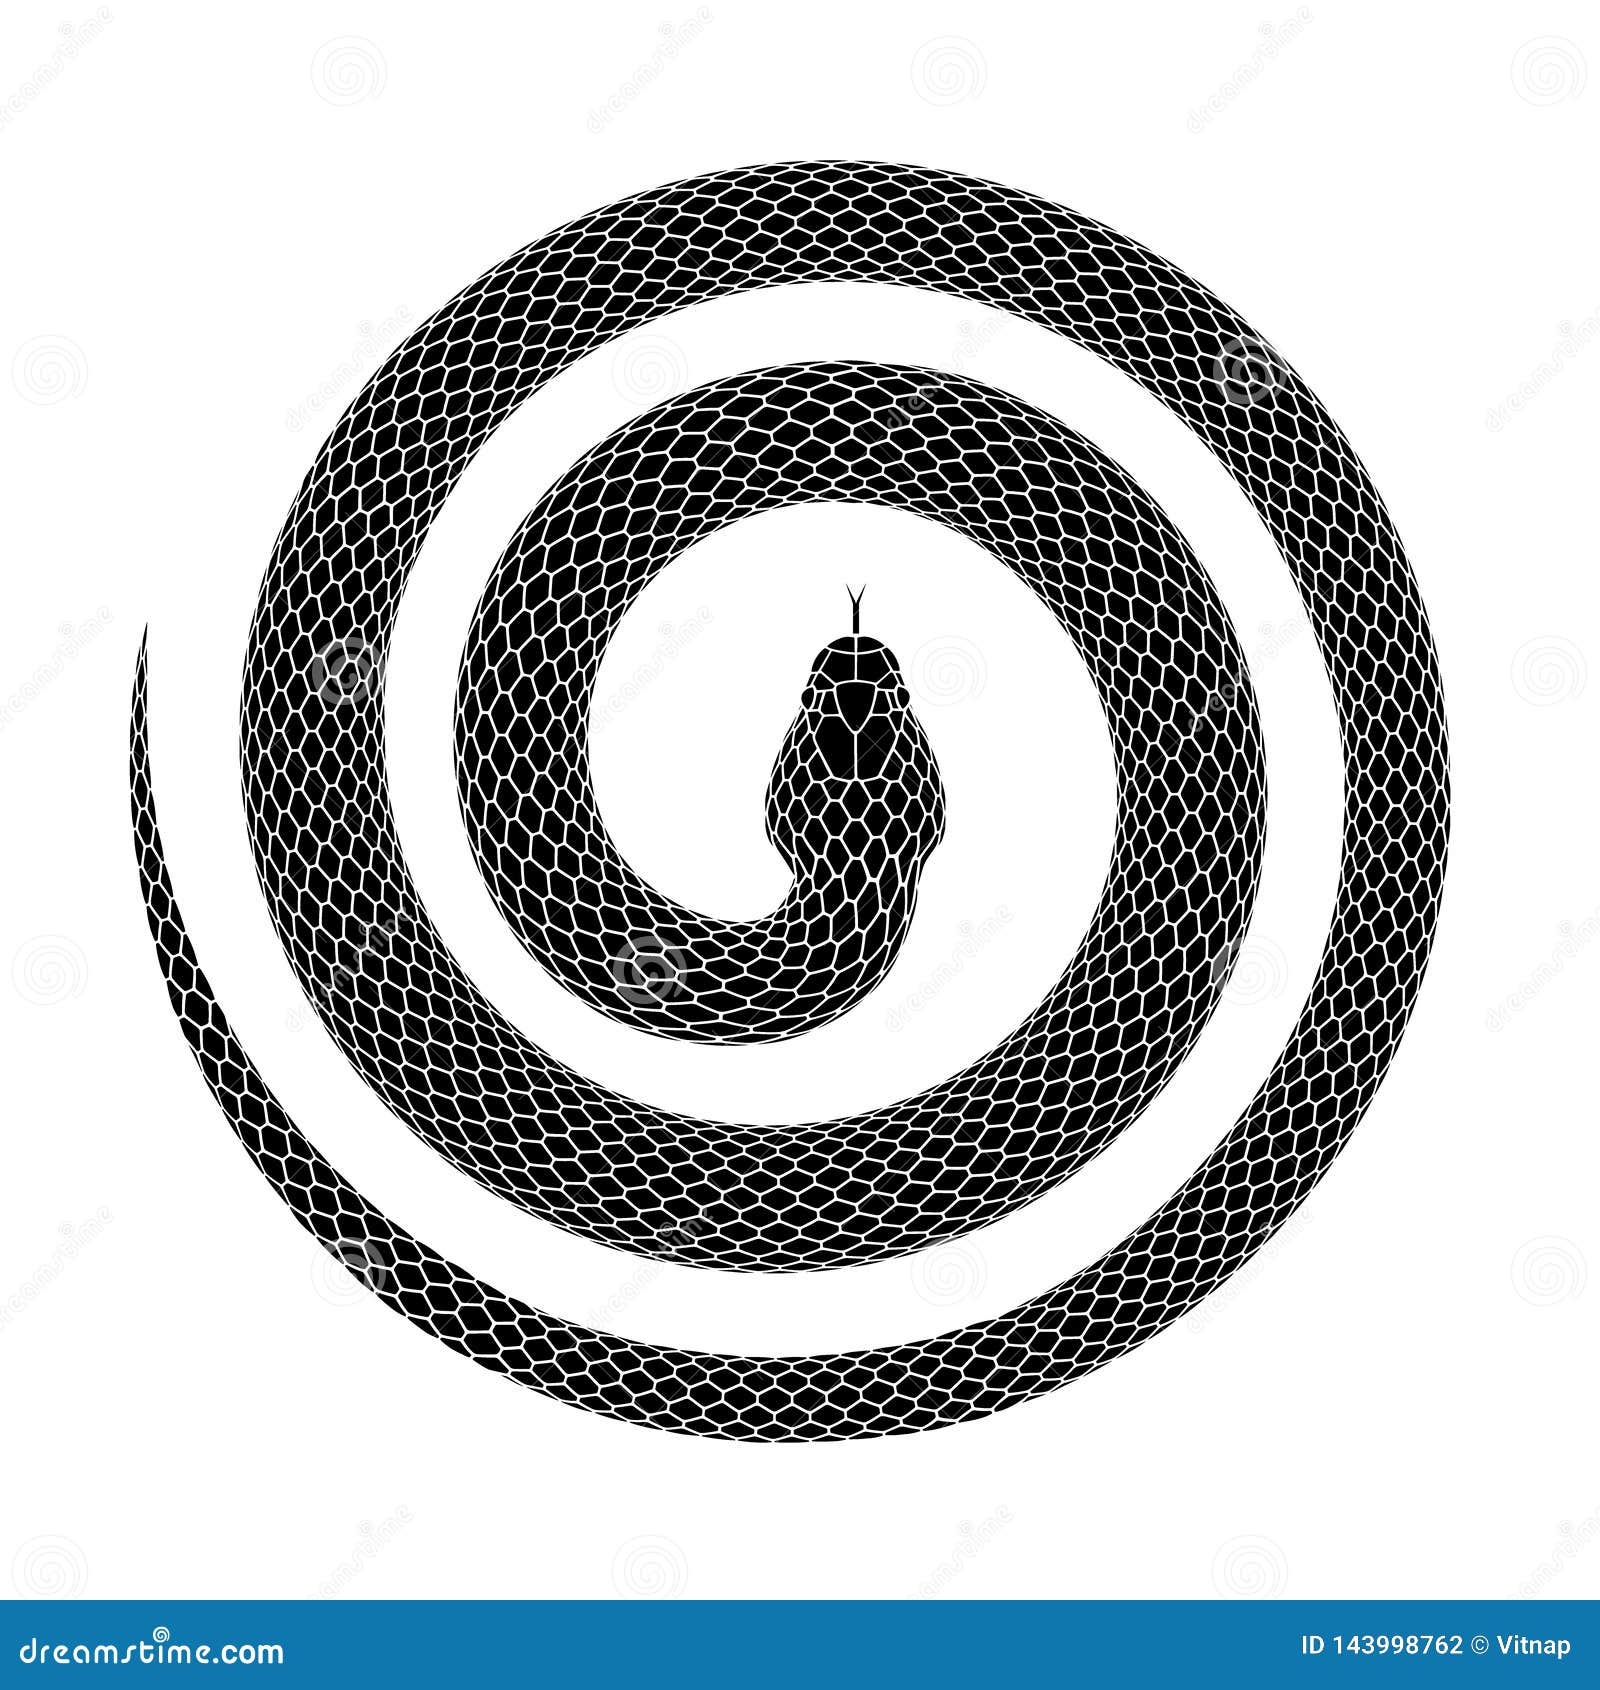 Vector Tattoo Design of a Snake Curled into a Spiral Shape with Head in the  Center Stock Vector - Illustration of bent, helix: 143998762